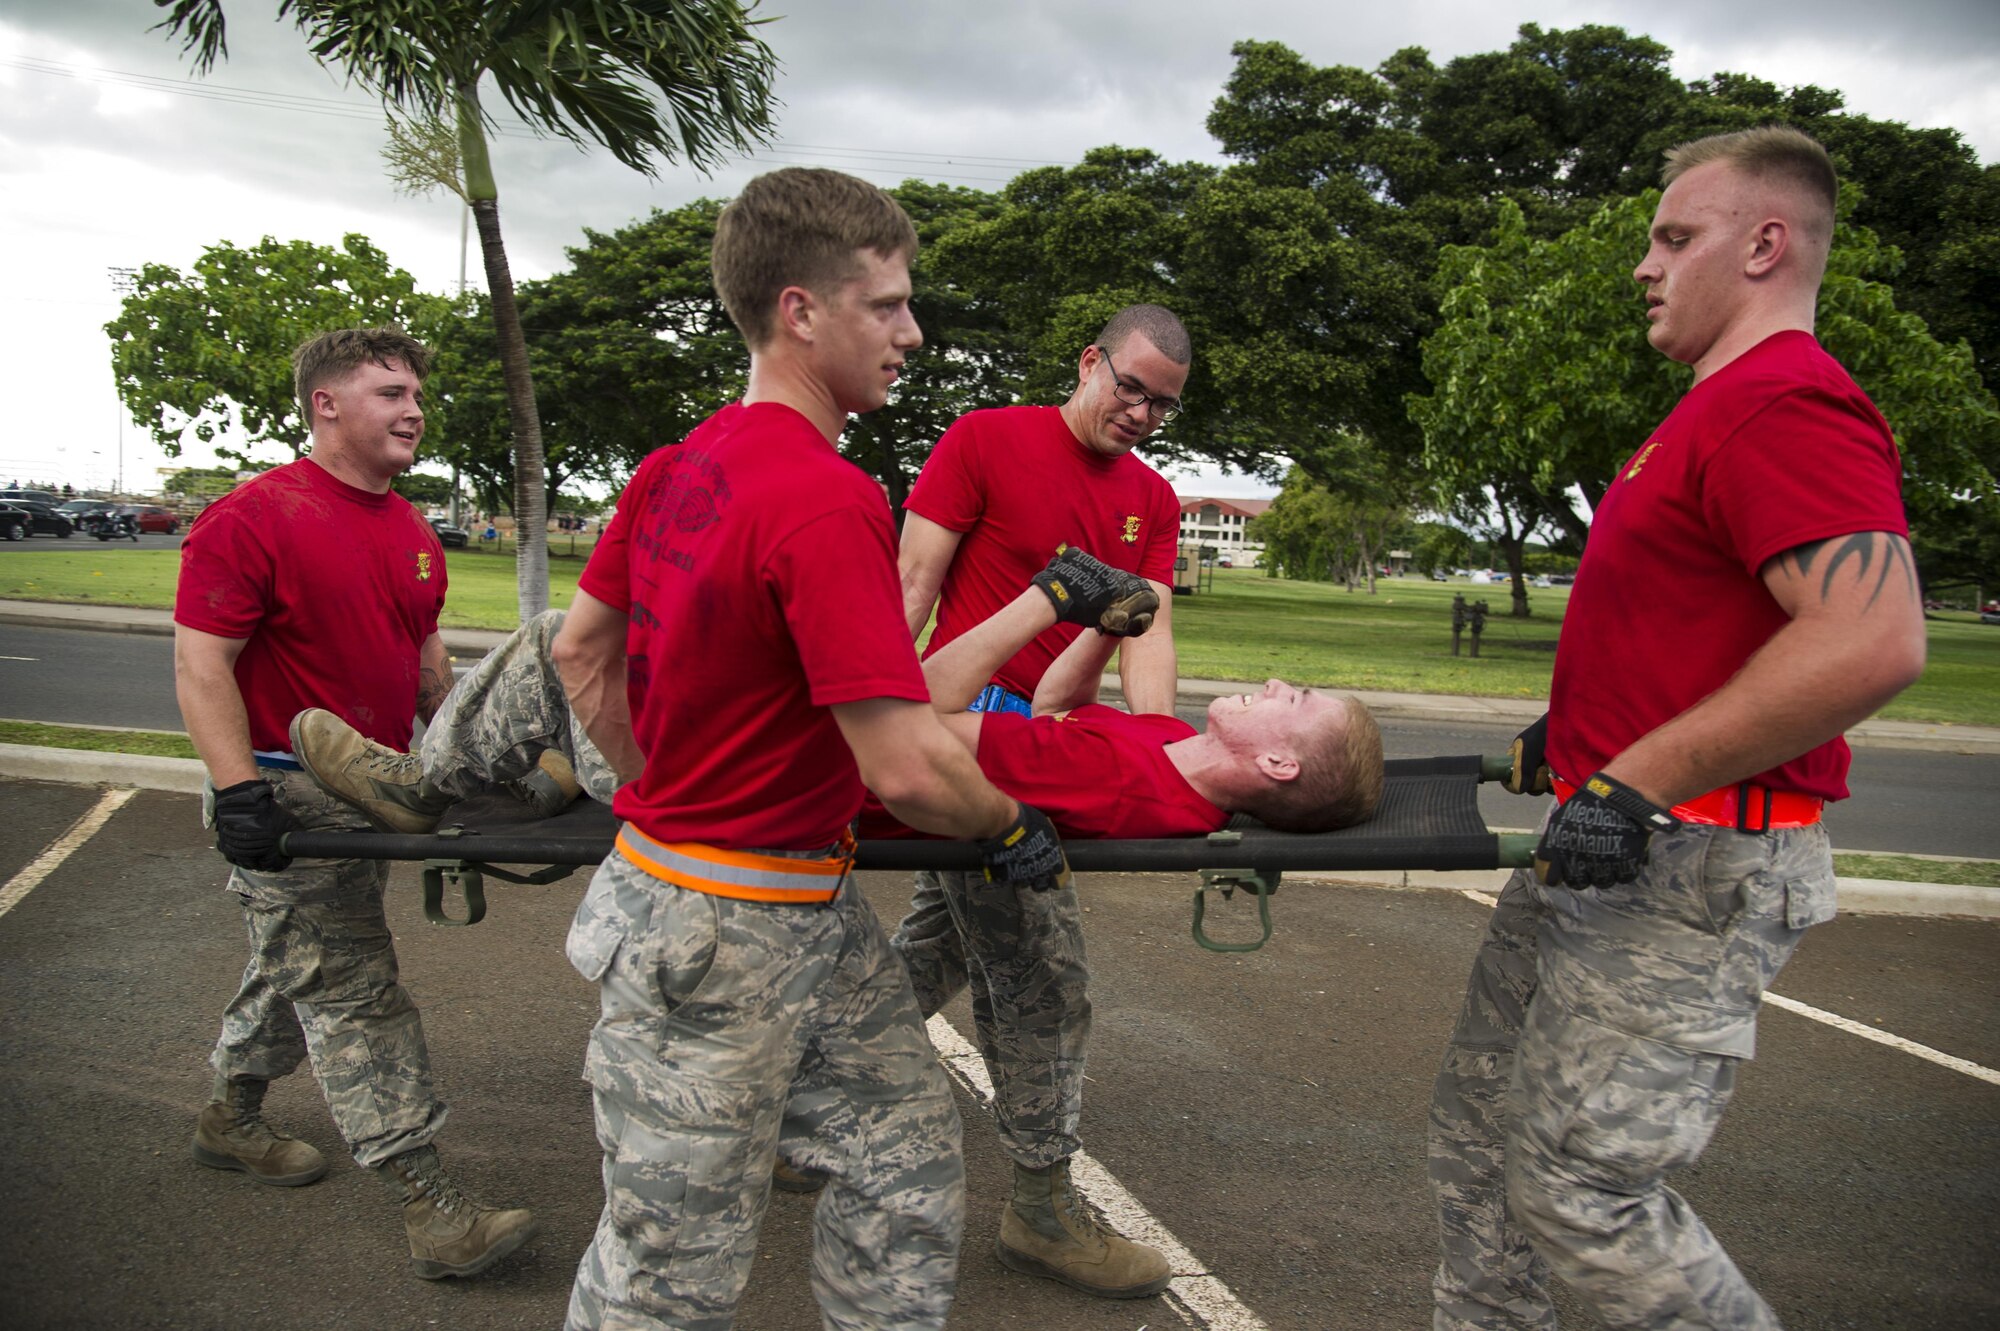 Service members from the 647th Logistics Readiness Squadron combat mobility flight perform a litter carry during the combat fitness challenge portion of the Hickam Port Dawg Challenge, at Joint Base Pearl Harbor-Hickam, Hawaii, Nov. 17, 2017. The aerial port community hosts a Port Dawg Challenge every year to promote professionalism, and demonstrate air and space expeditionary force capabilities. (U.S. Air Force photo by Tech. Sgt. Heather Redman)